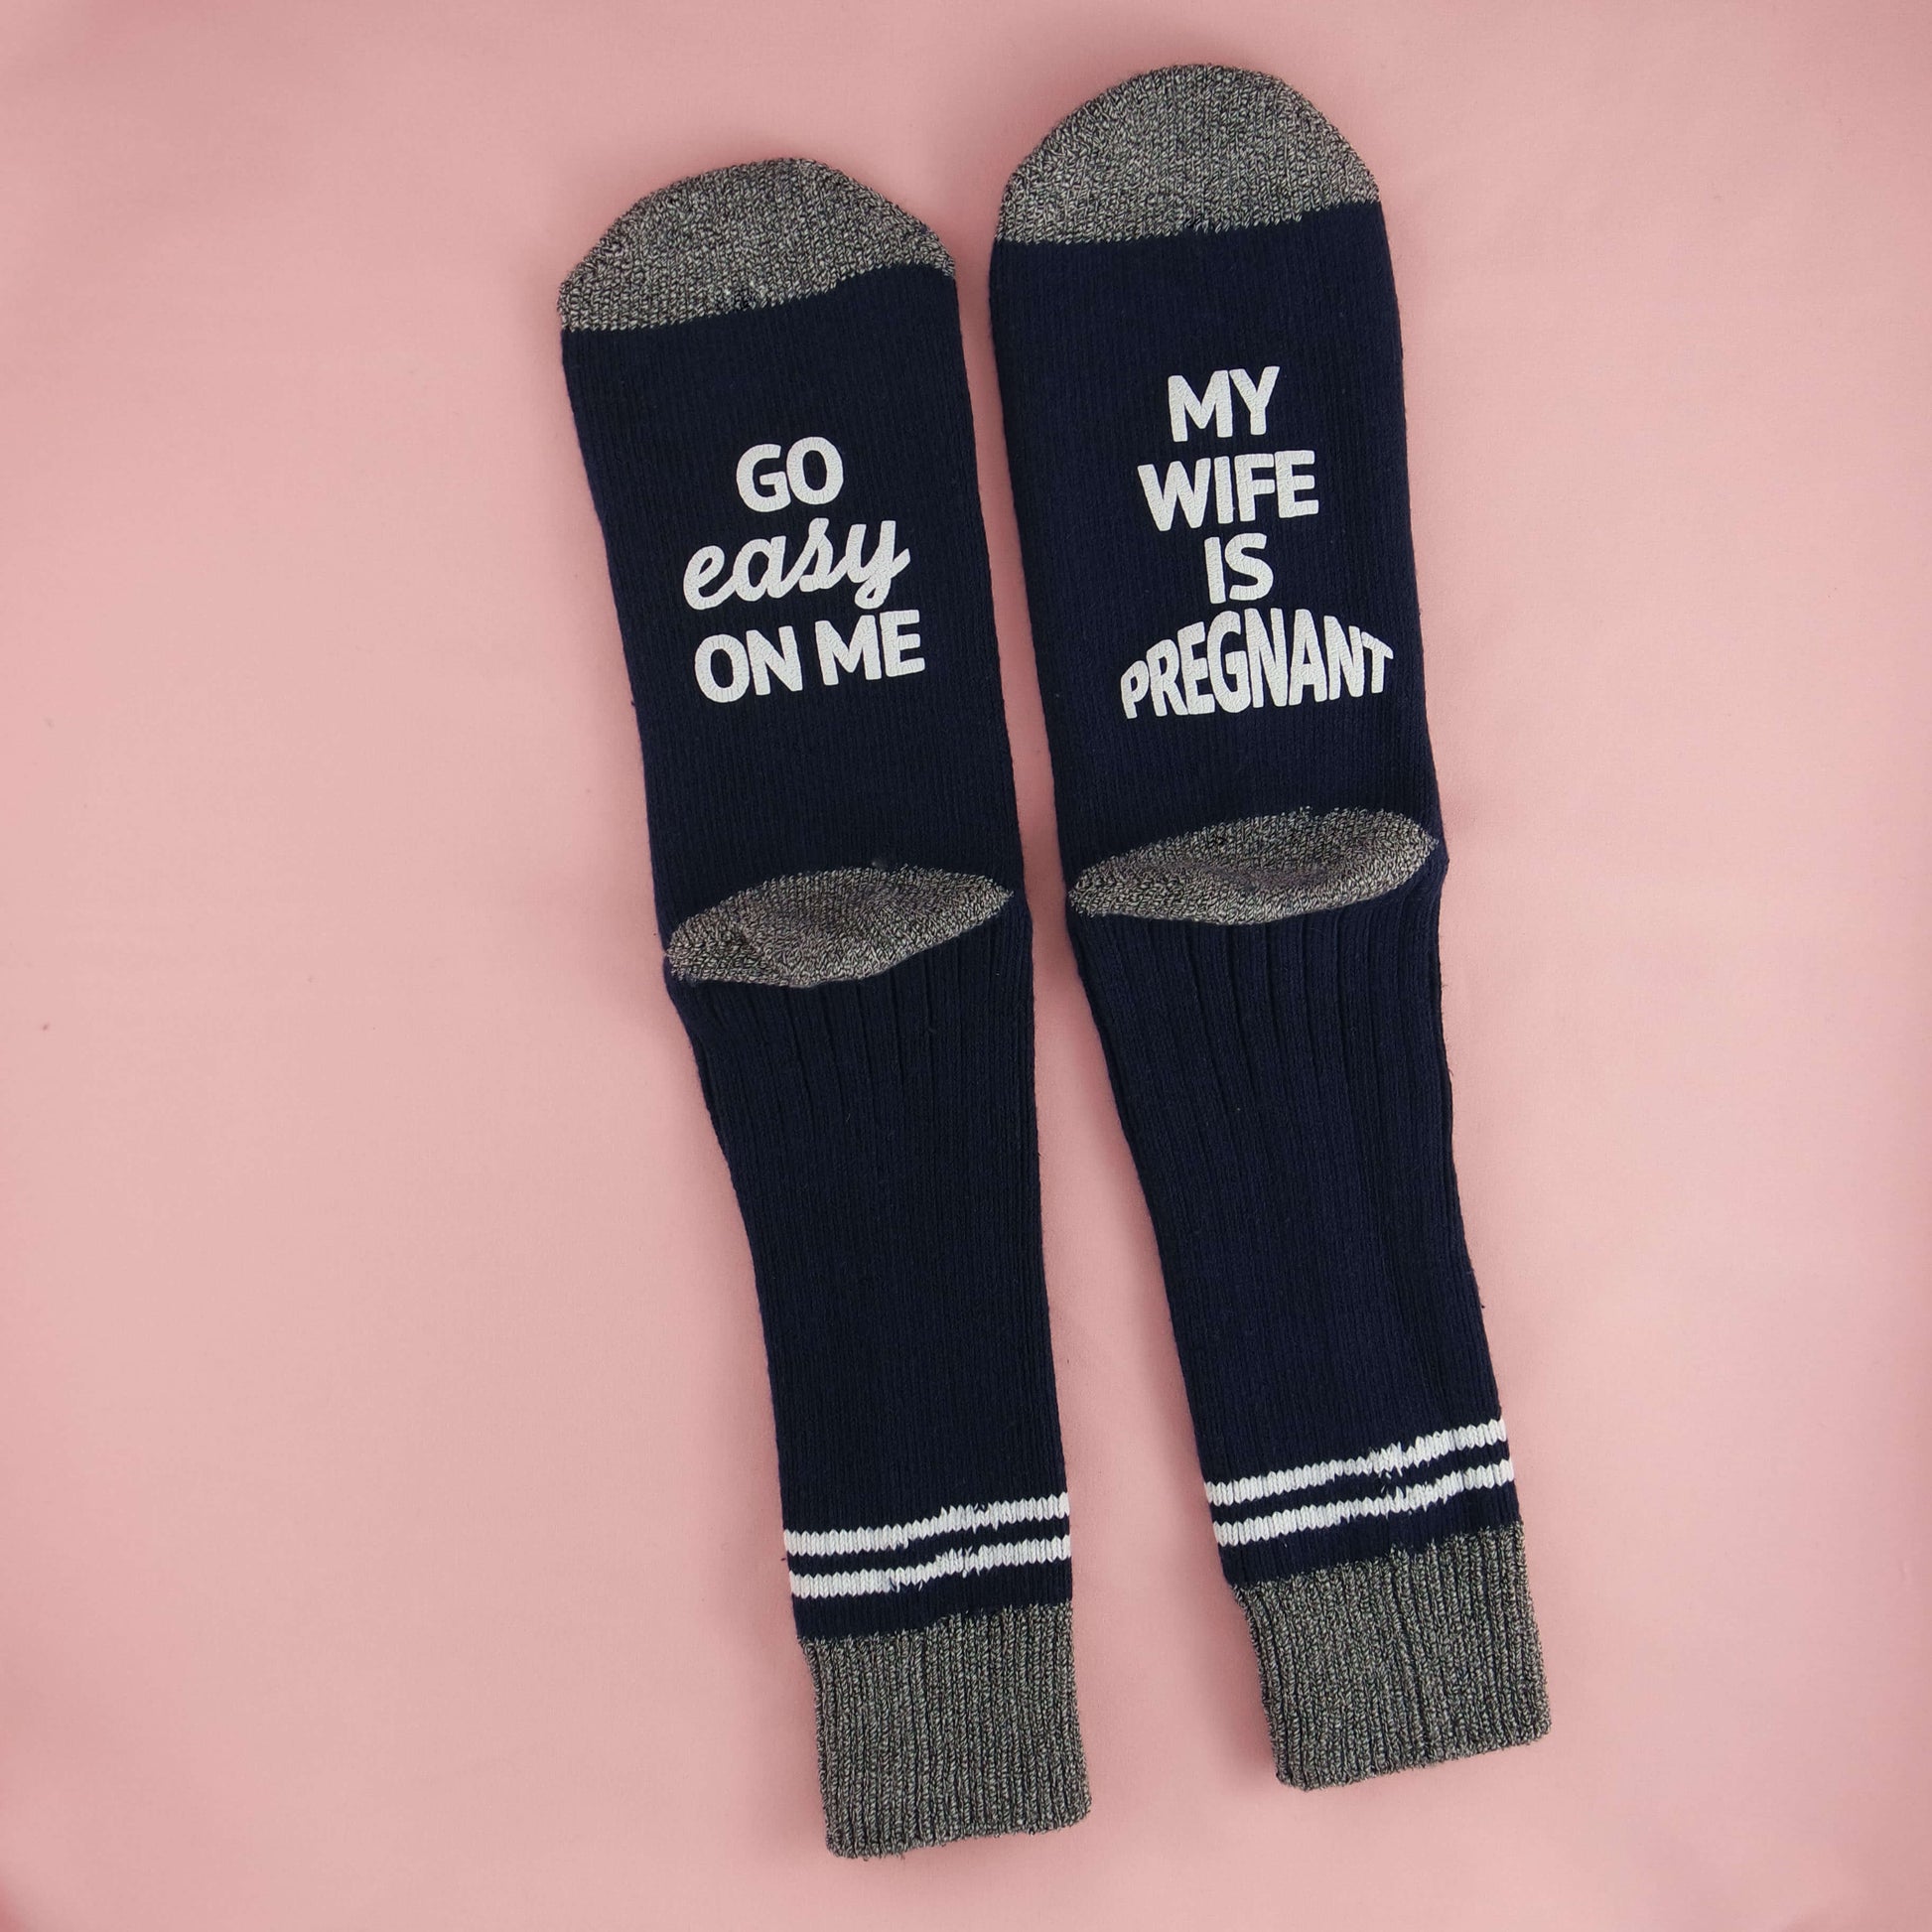 Socks conveying a playful and supportive message for partners of pregnant women, with the phrases 'GO EASY ON ME' and 'MY WIFE IS PREGNANT,' encouraging empathy and patience.